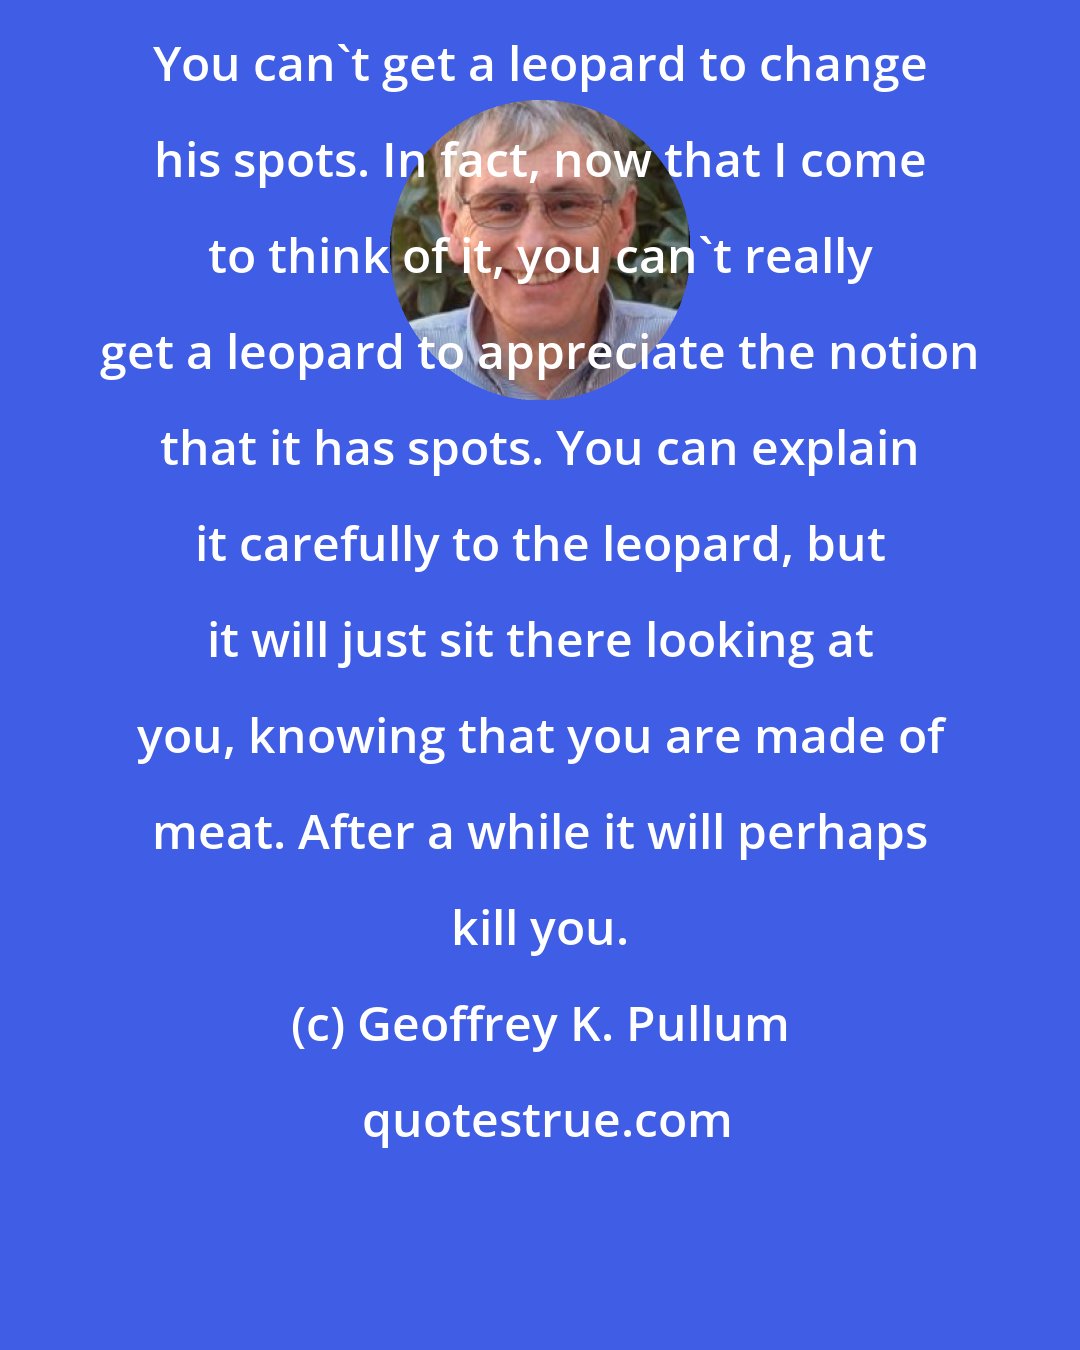 Geoffrey K. Pullum: You can't get a leopard to change his spots. In fact, now that I come to think of it, you can't really get a leopard to appreciate the notion that it has spots. You can explain it carefully to the leopard, but it will just sit there looking at you, knowing that you are made of meat. After a while it will perhaps kill you.